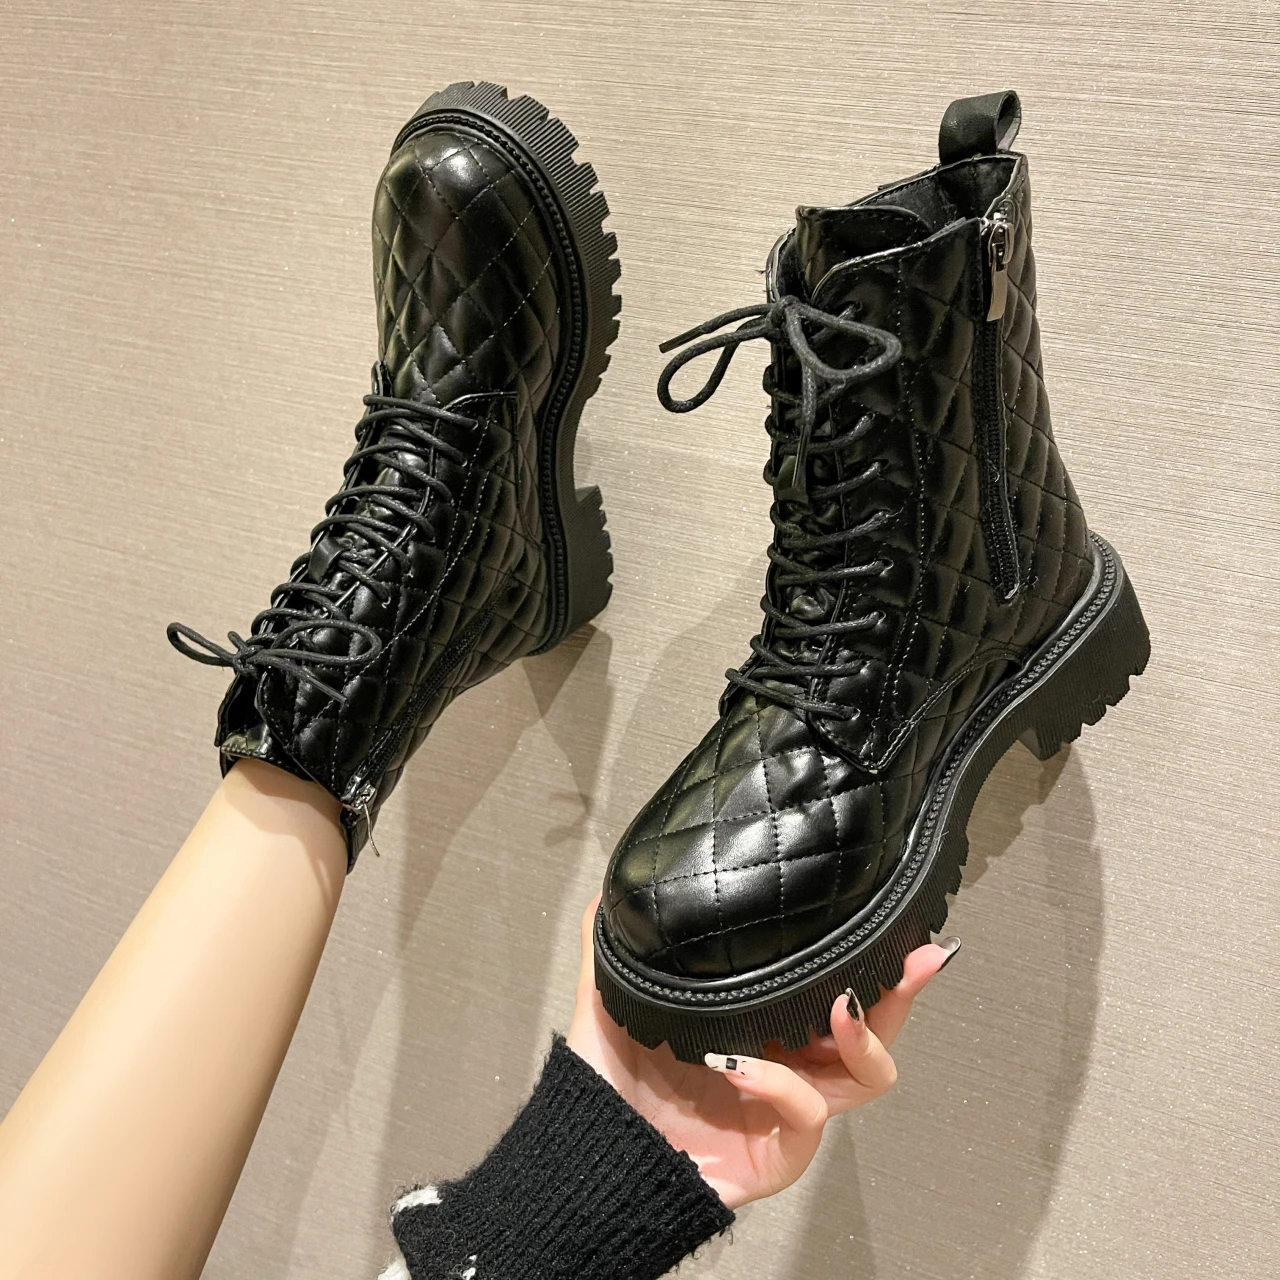 

Women Boots Waterproof Winter Shoes Women Snow Boots Platform Keep Warm Ankle Winter Boots Thick Heels Botas Mujer Plus Size